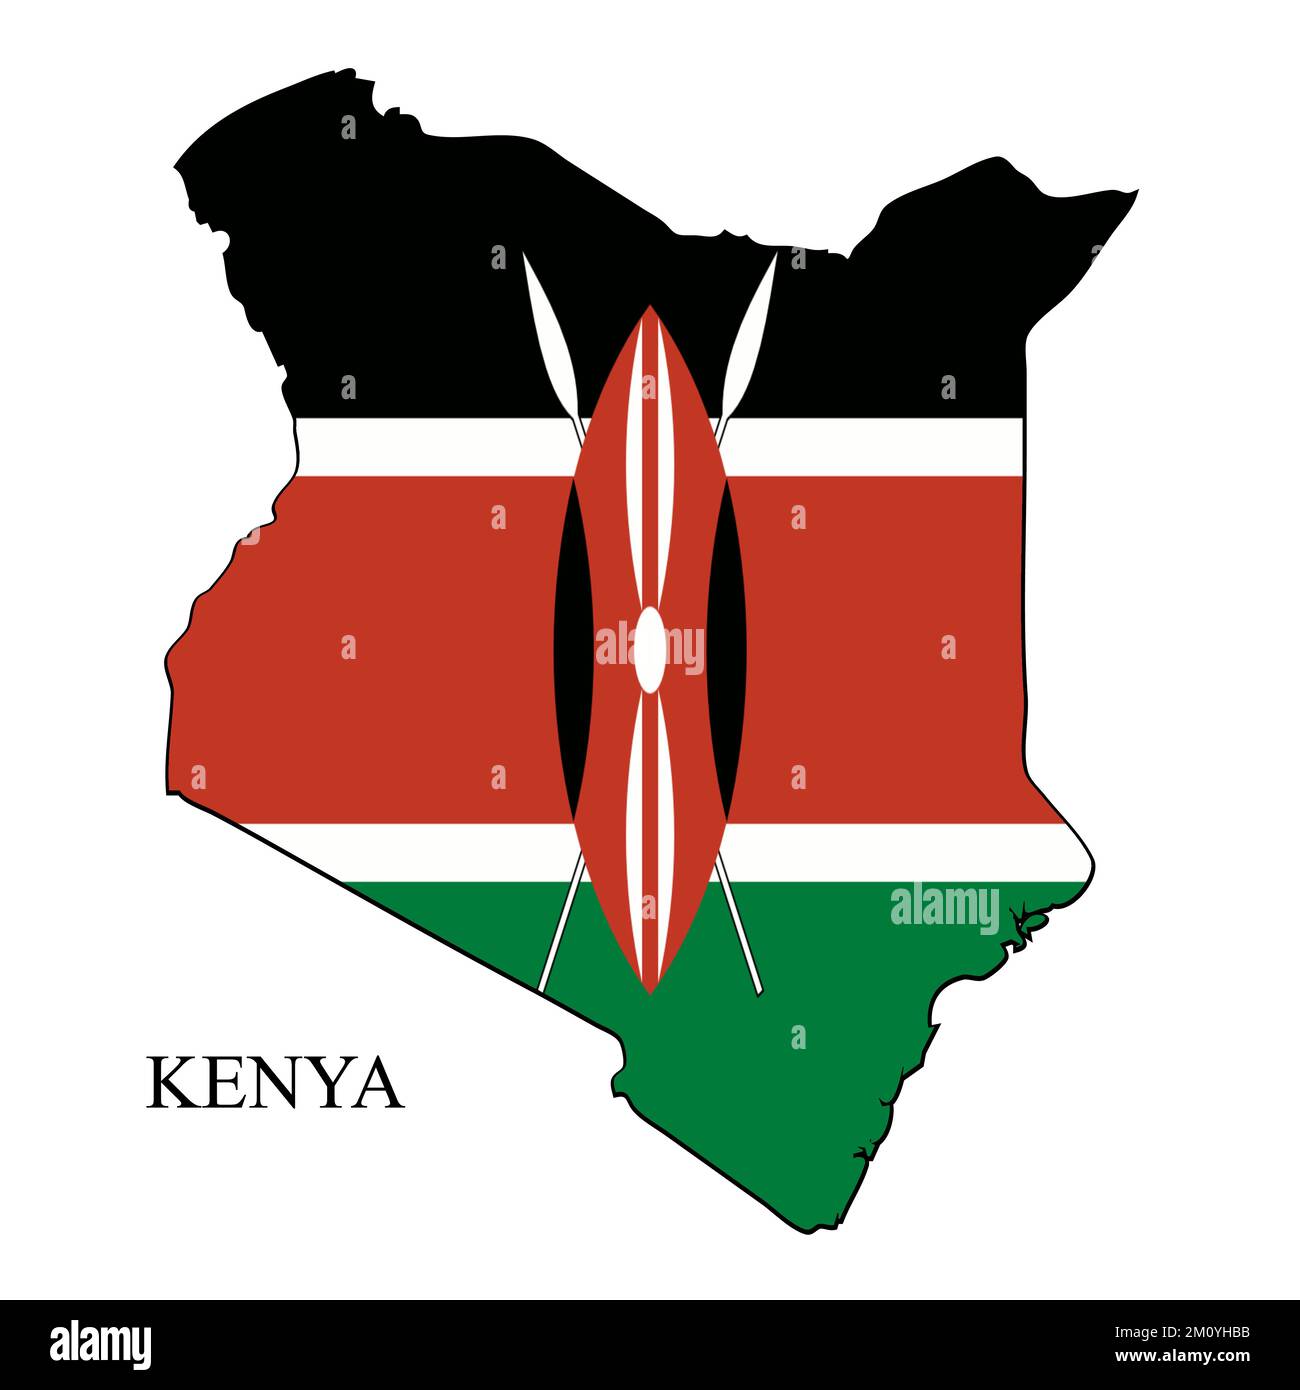 Kenya map vector illustration. Global economy. Famous country. Eastern Africa. Africa. Stock Vector